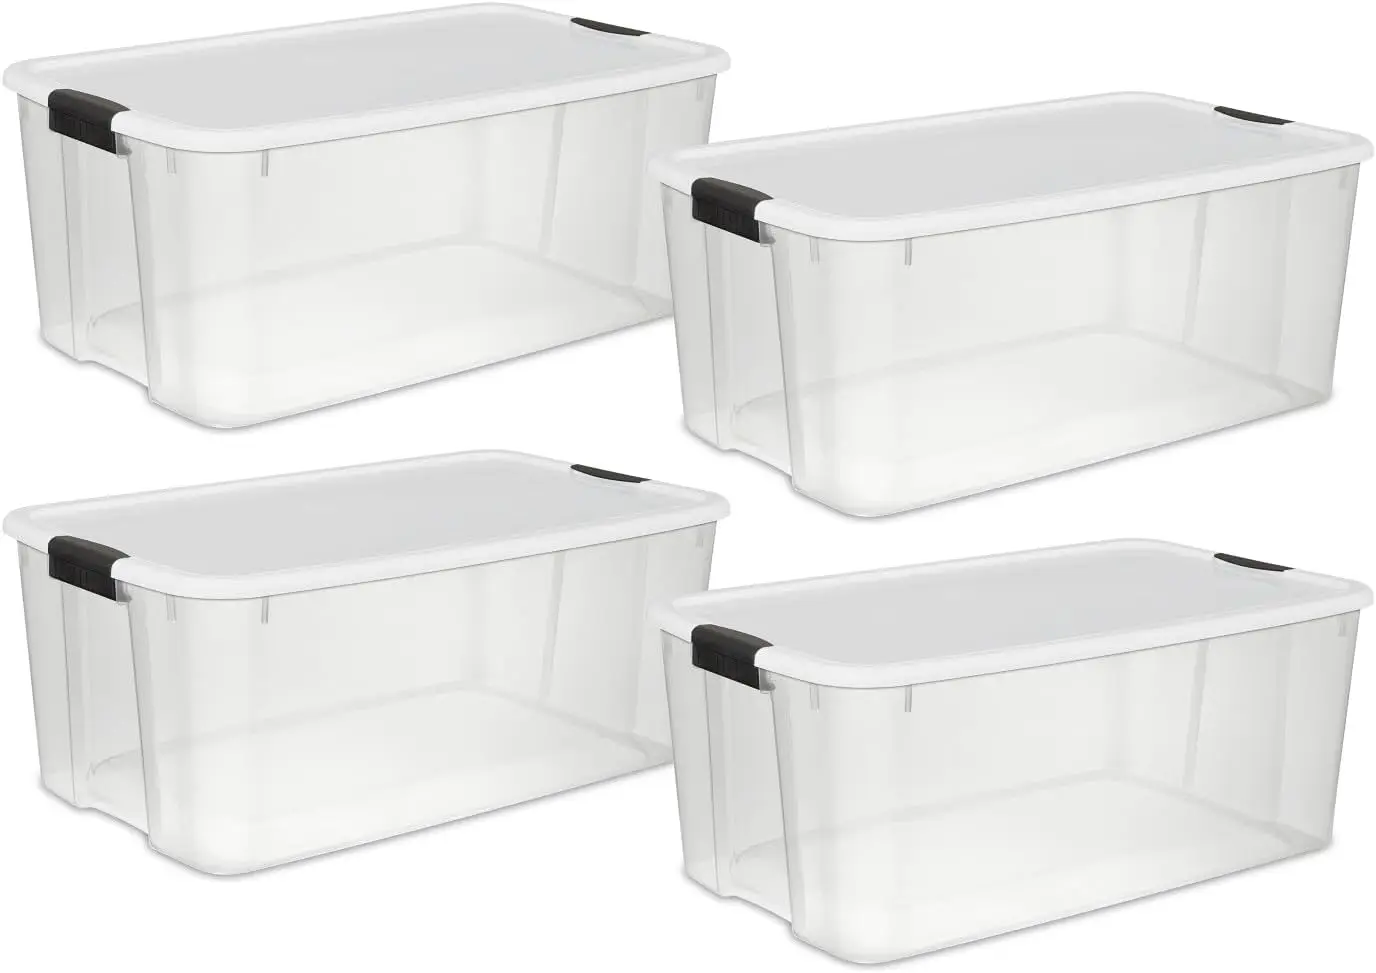 

Stackable Storage Bin with Lid, Plastic Container with Heavy Duty Latches to Organize, Clear and White Lid, 4-Pack